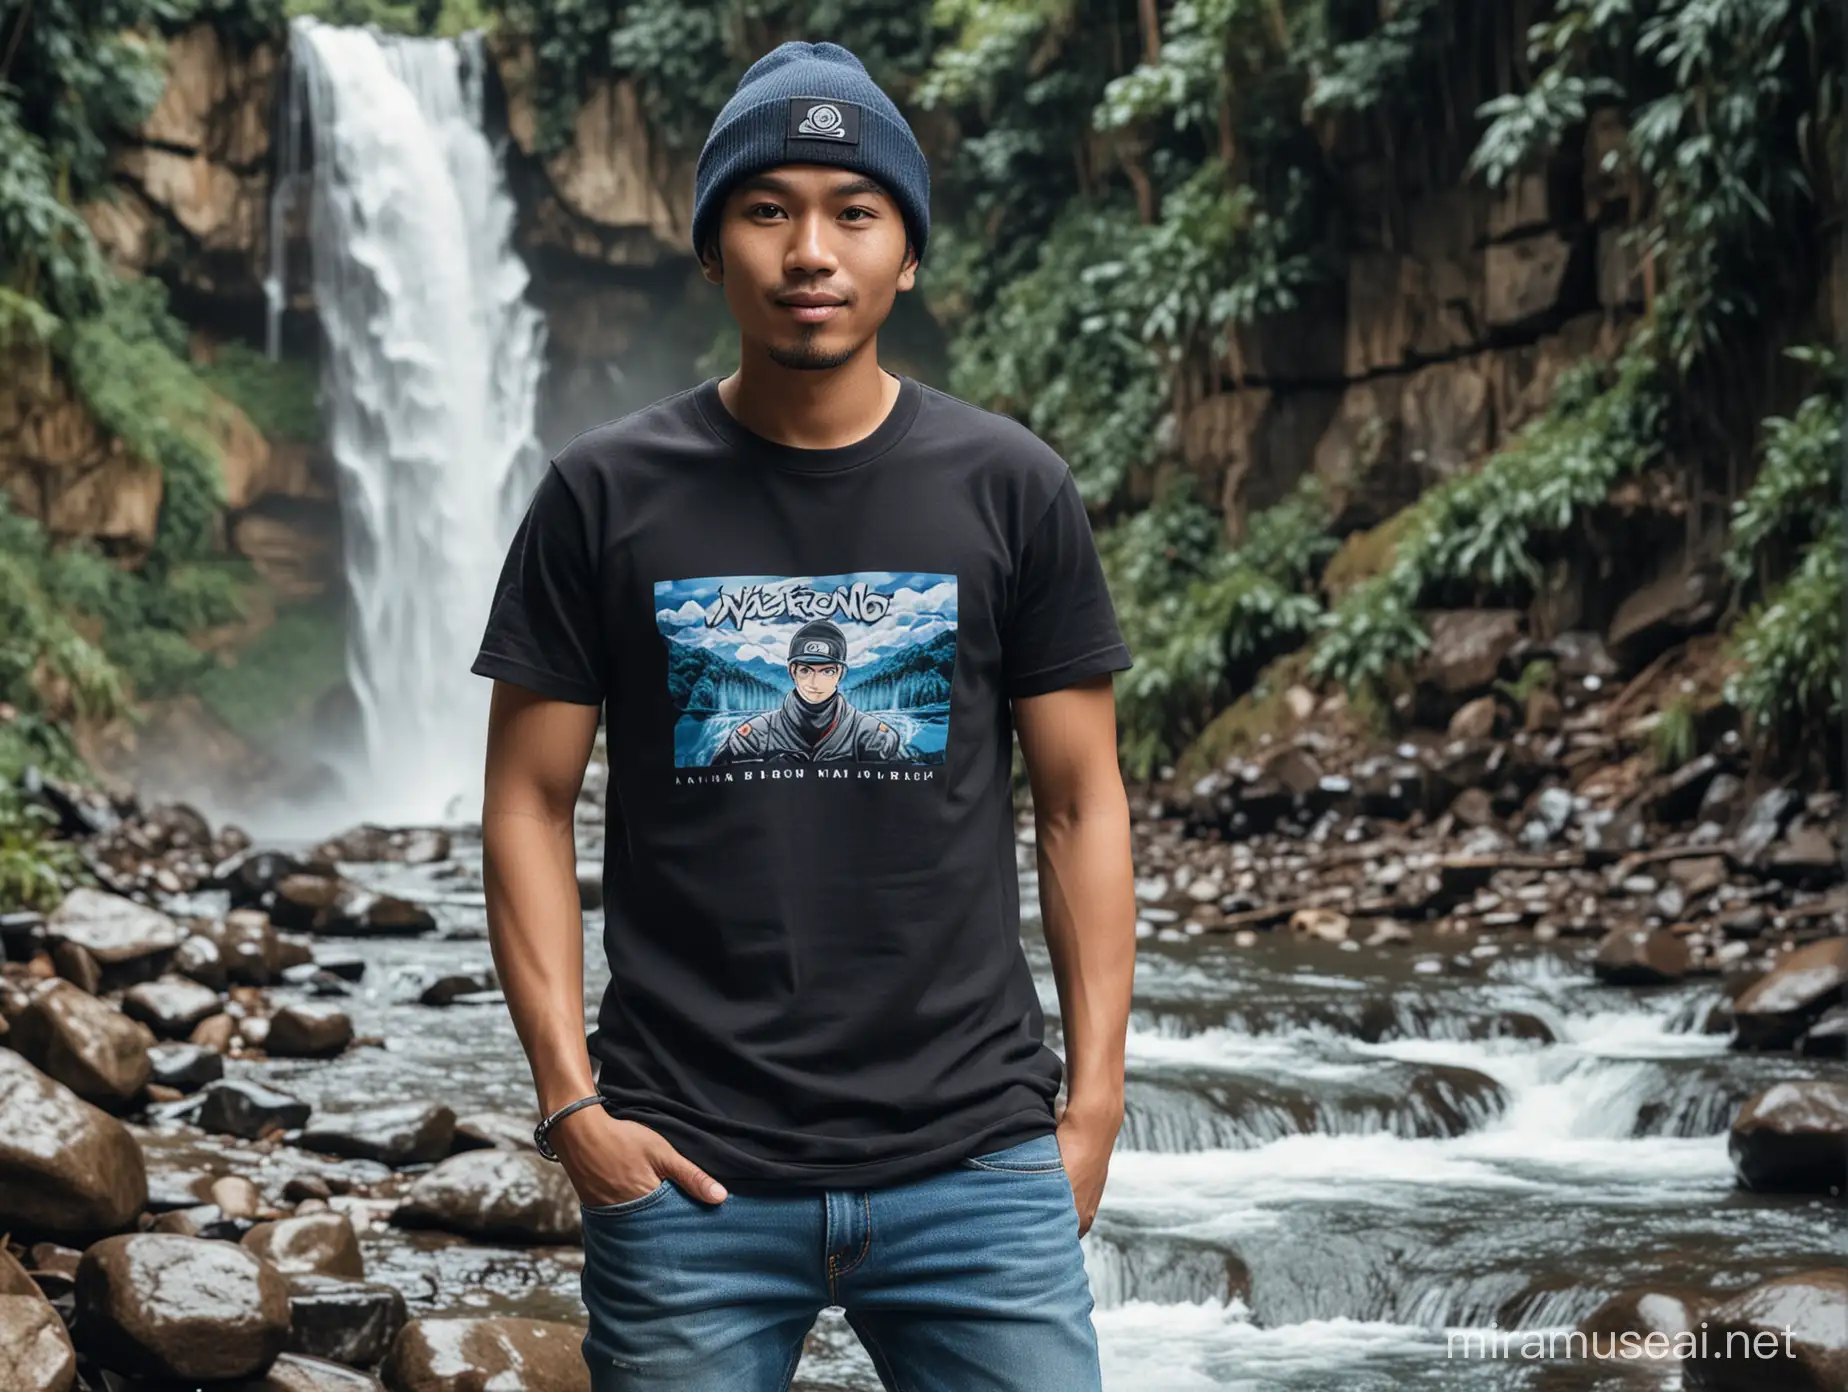 Stylish Indonesian Man in Naruto TShirt Poses by Waterfall